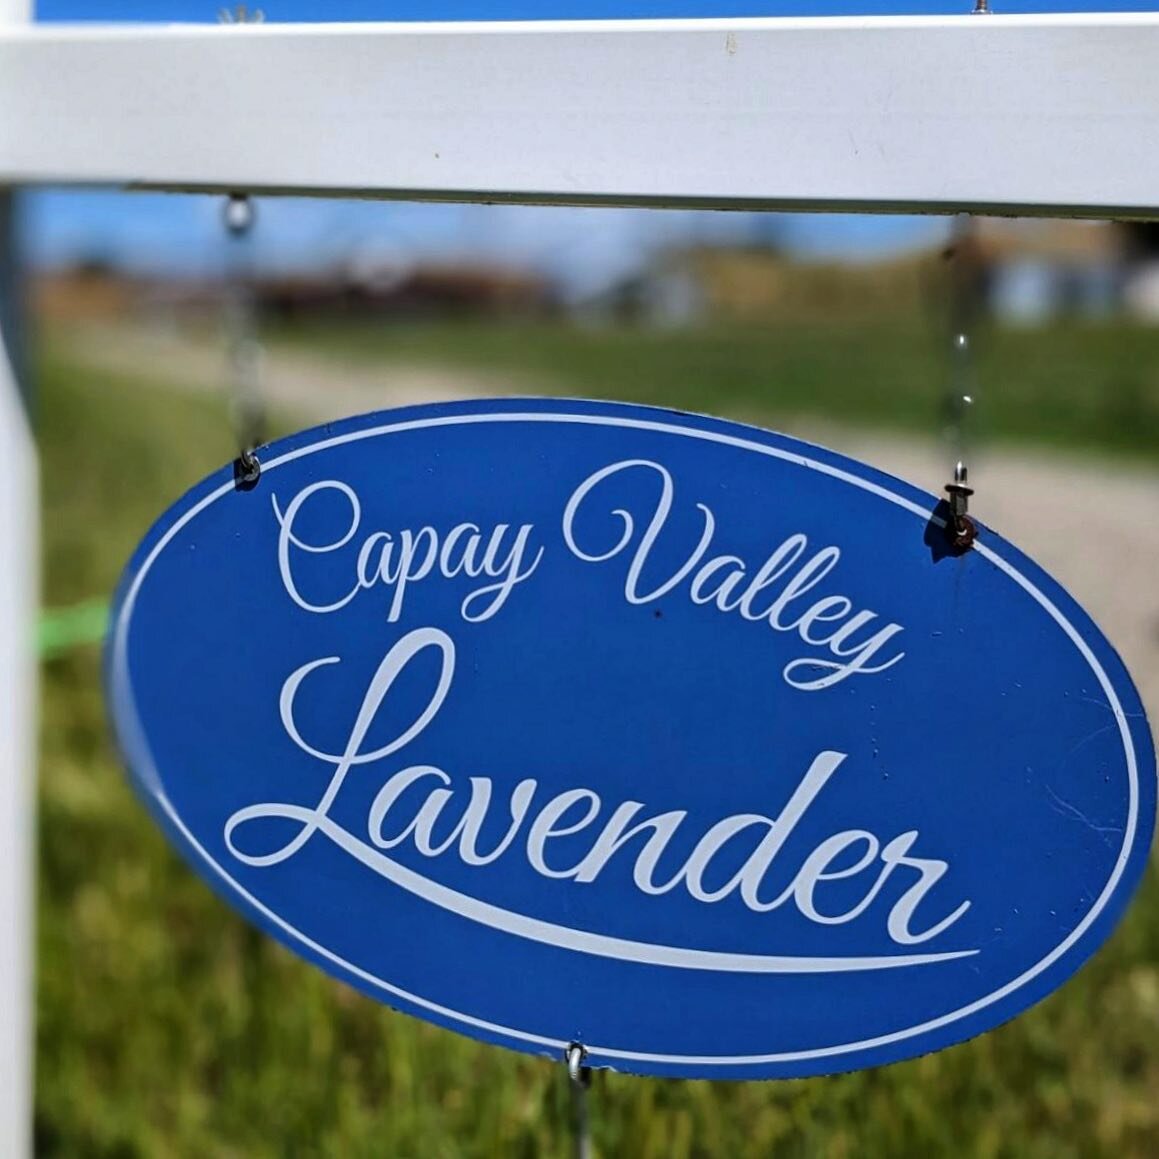 We love supporting and using local ingredients. One of our faves is @capay_valley_lavender which we use in our StrawPerry, they have a great story and outstanding lavender! 

They started with a dream of farming and a small patch of land perfect for 